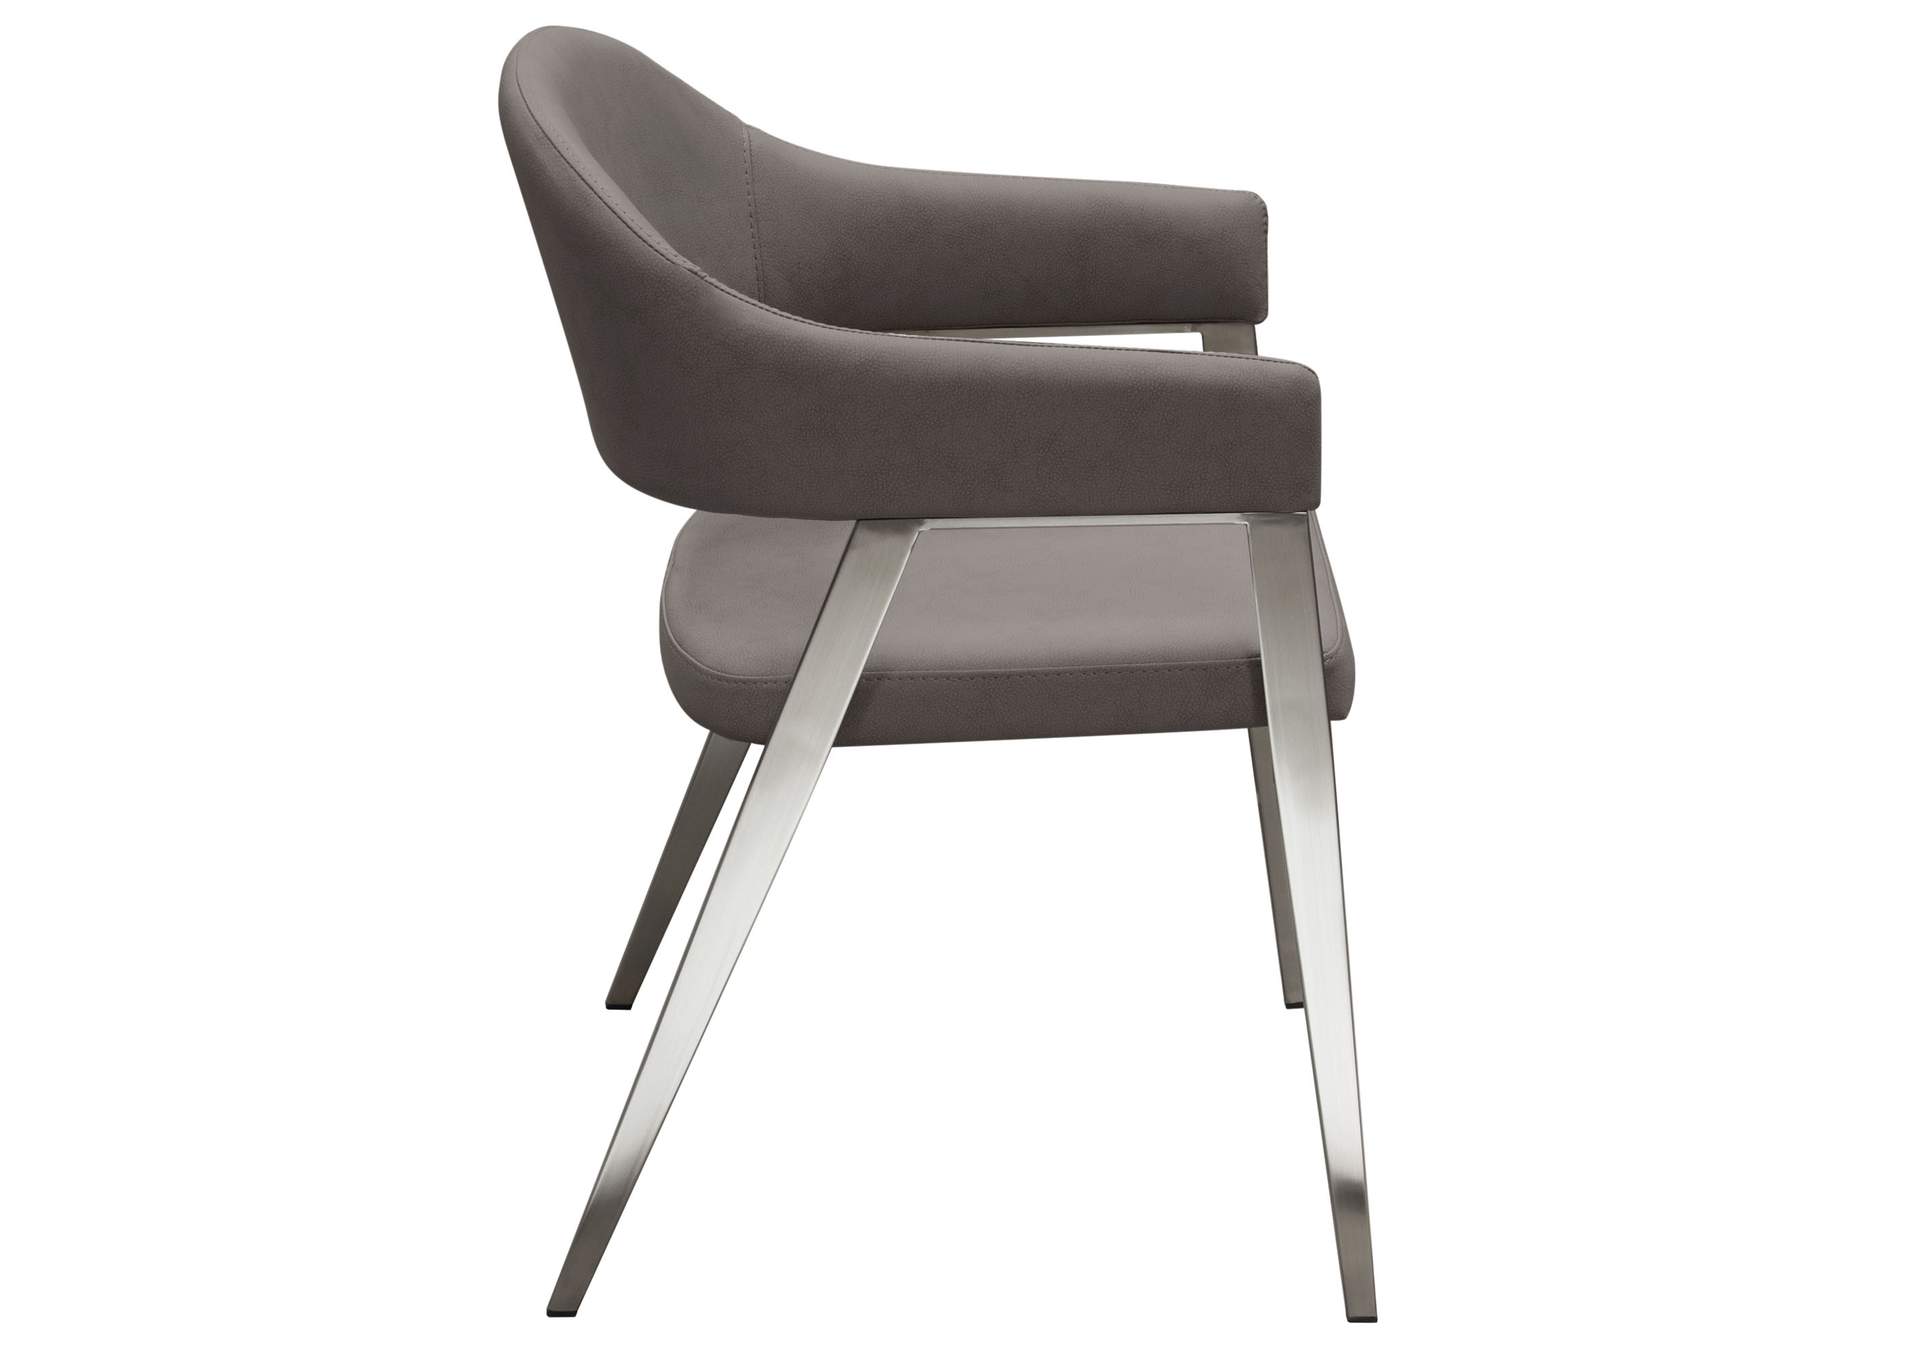 Adele Set of Two Dining/Accent Chairs in Grey Leatherette w/ Brushed Stainless Steel Leg by Diamond Sofa,Diamond Sofa